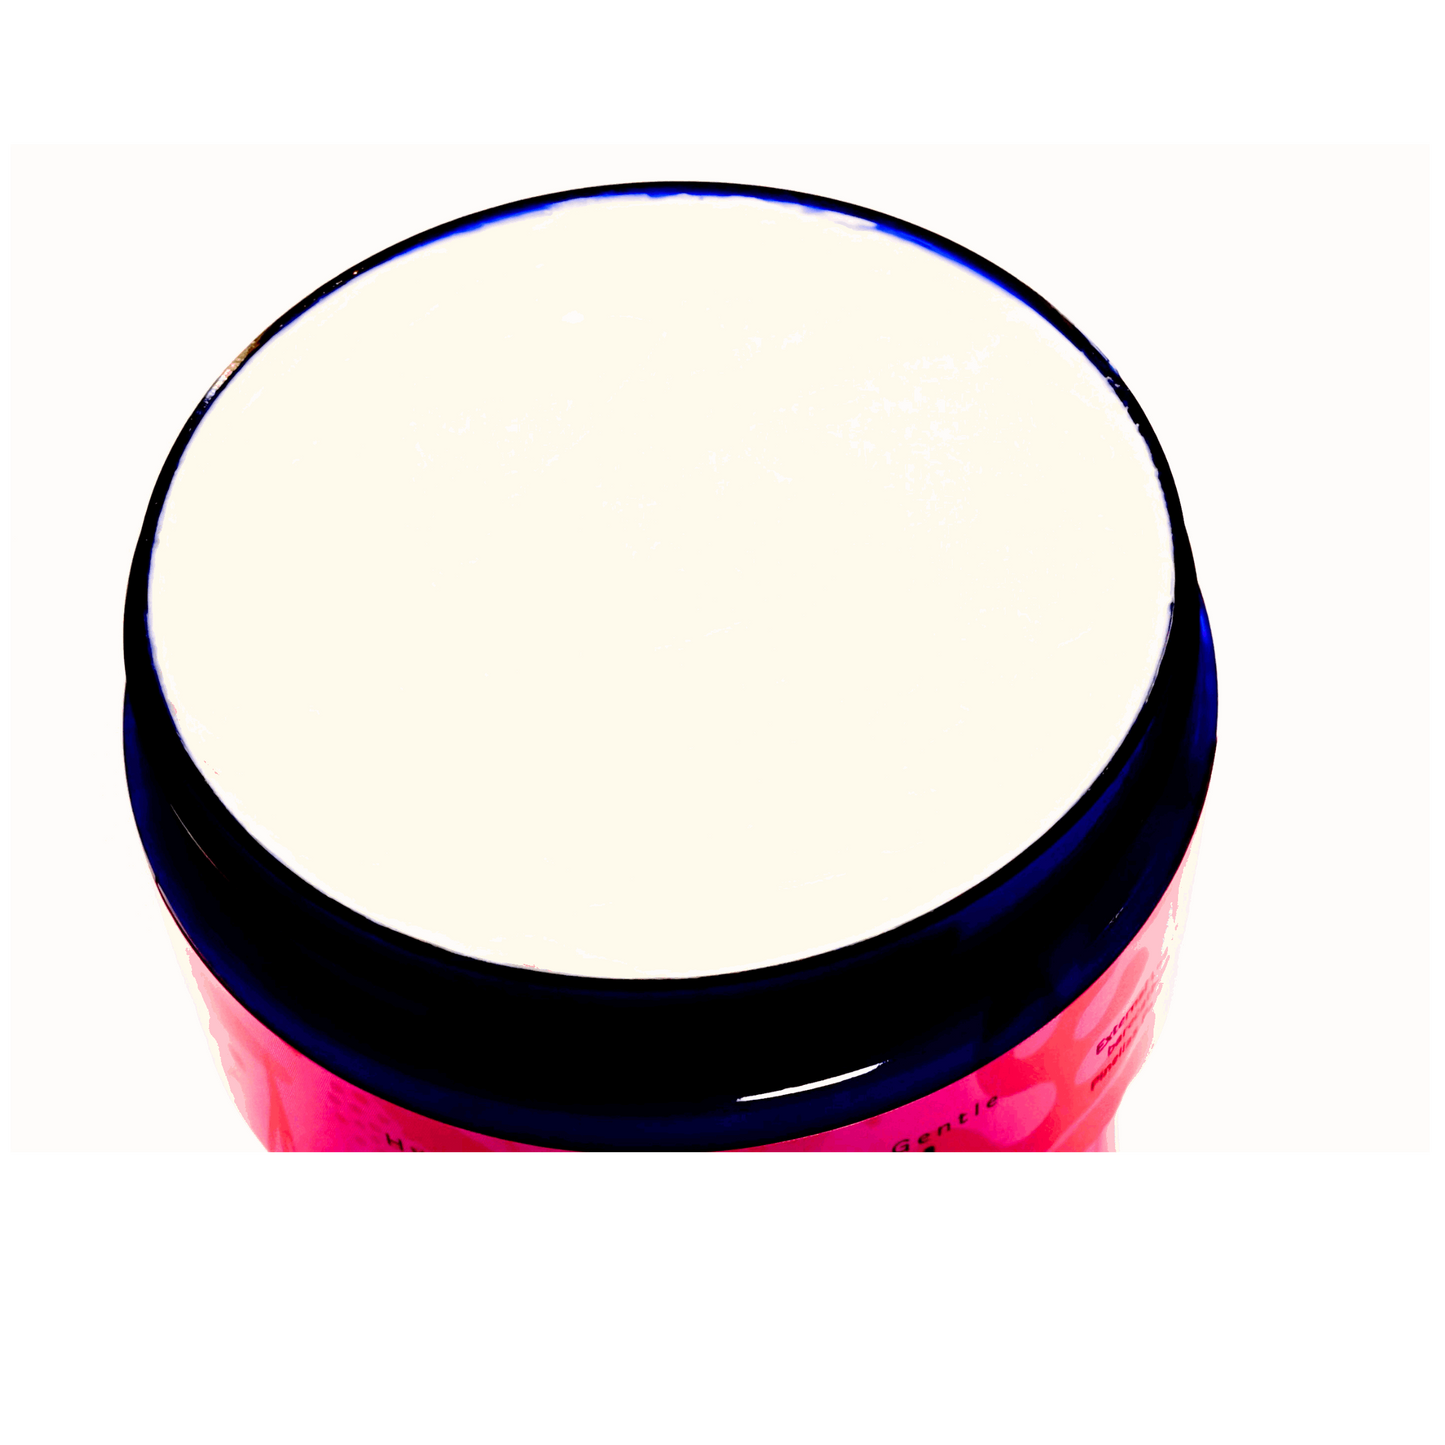 Jar of Relax, Restore, Renew Body Butter, showing its rich and creamy texture.